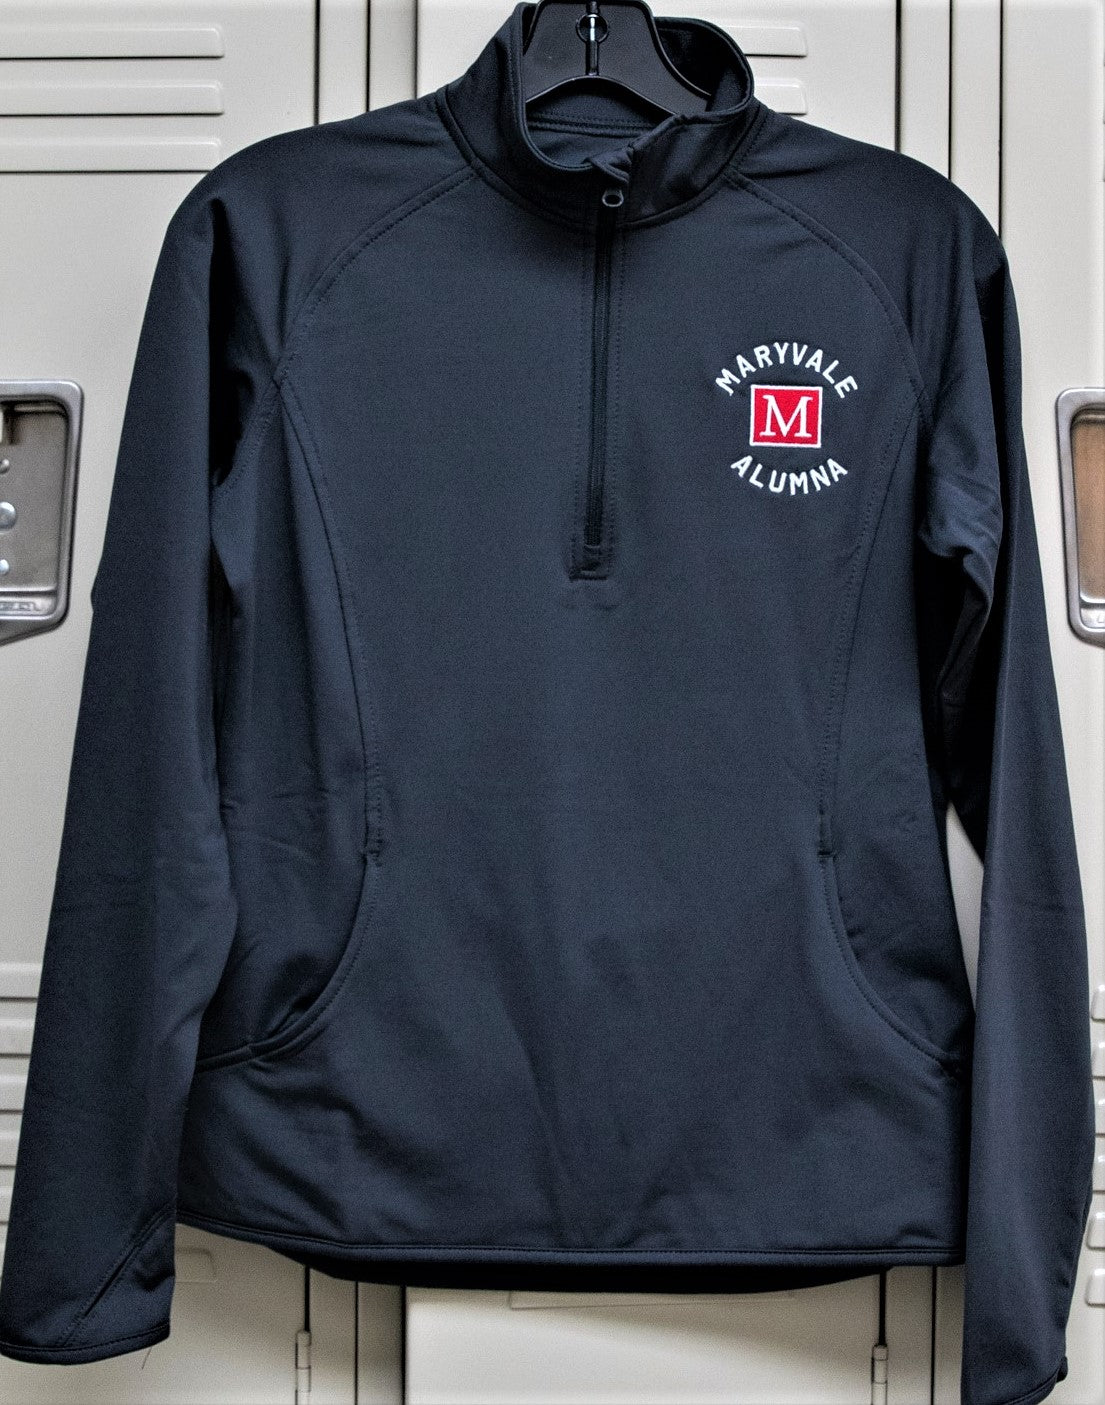 Maryvale Alumna 1/4 Zip Pullover